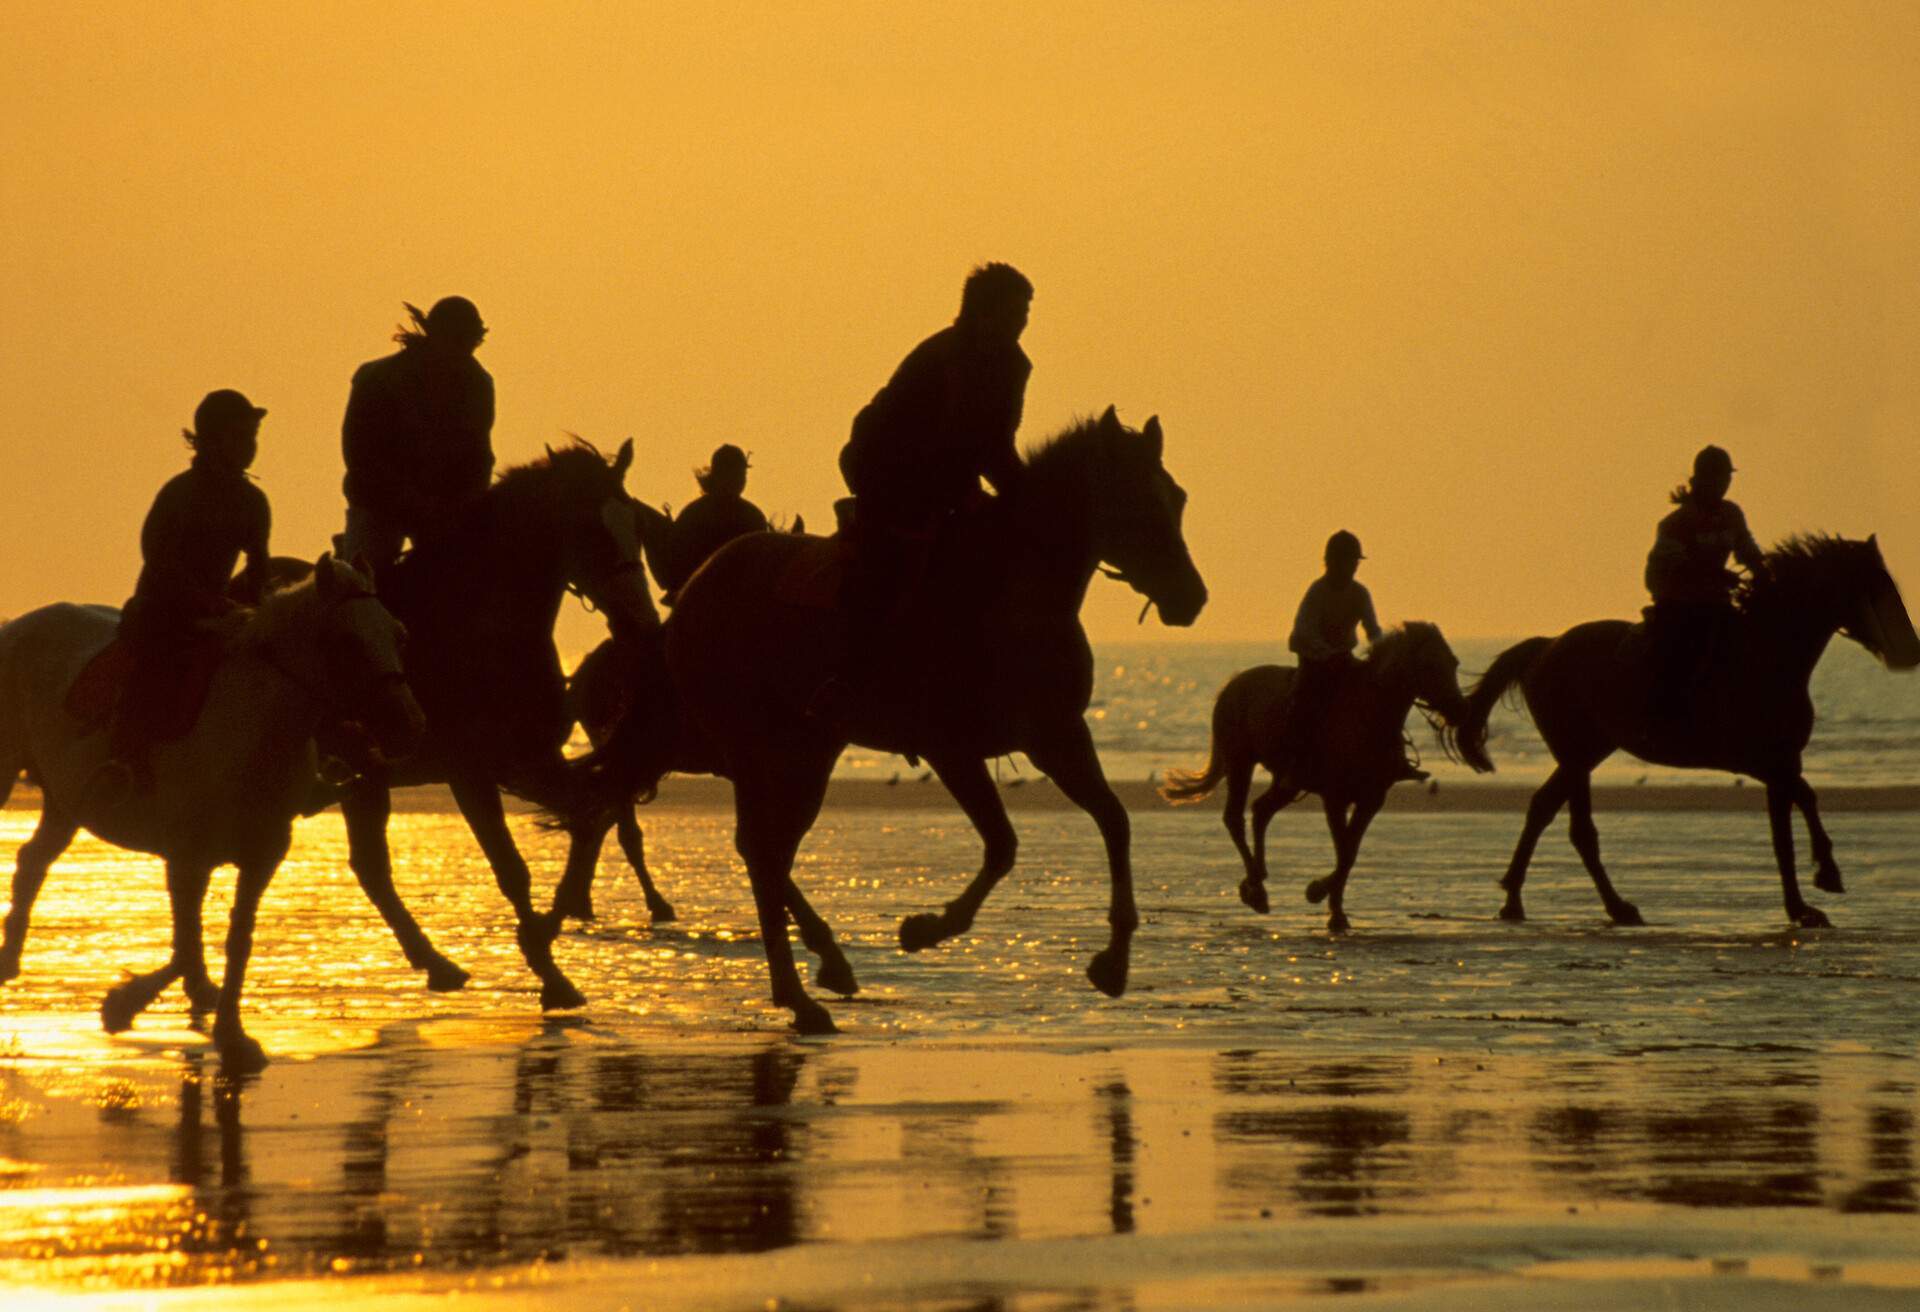 FRANCE_DEAUVILLE-BEACH_THEME_HORSES_RIDING_PEOPLE